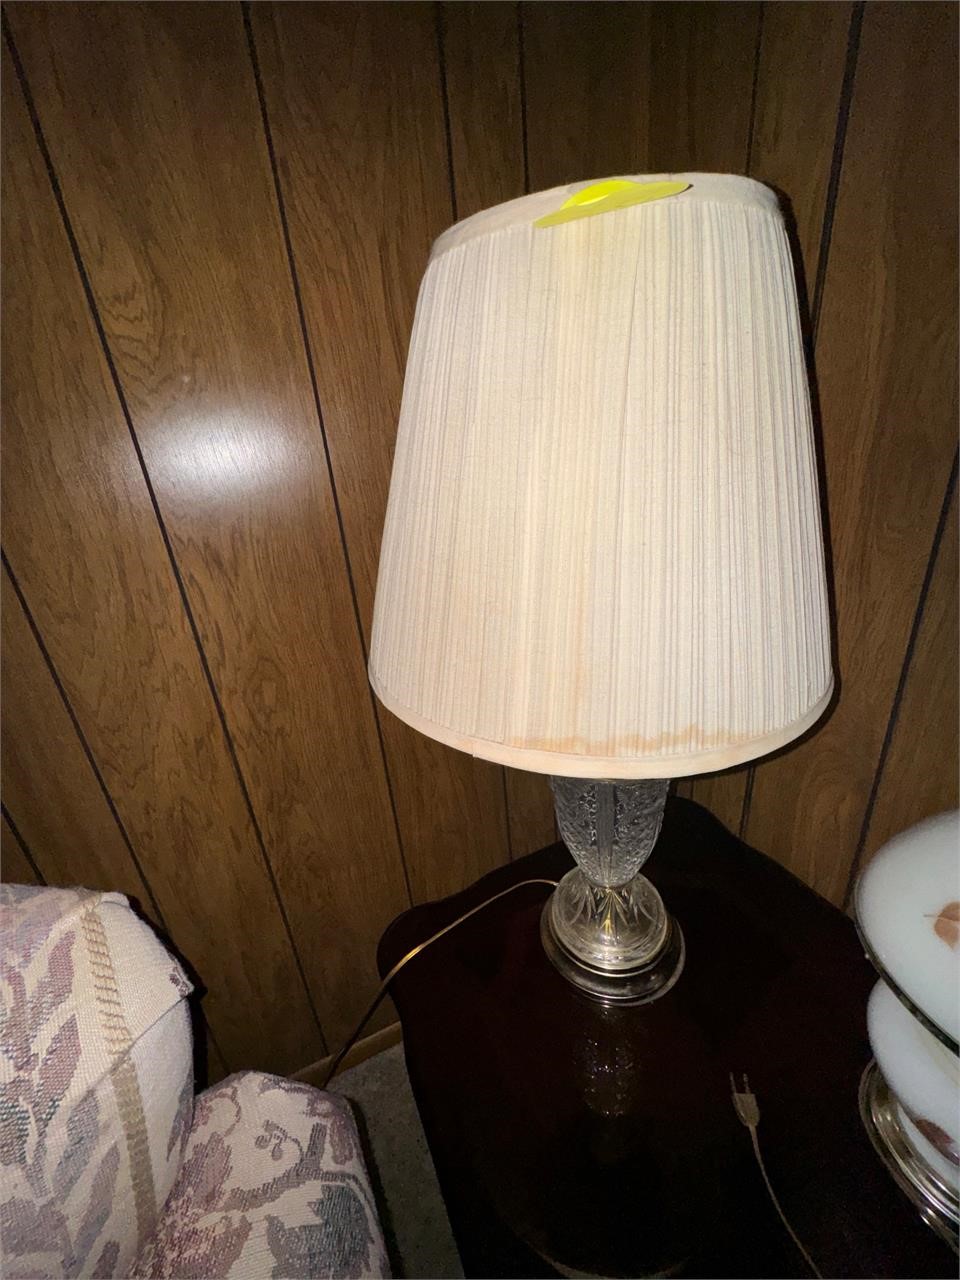 Table lamp .